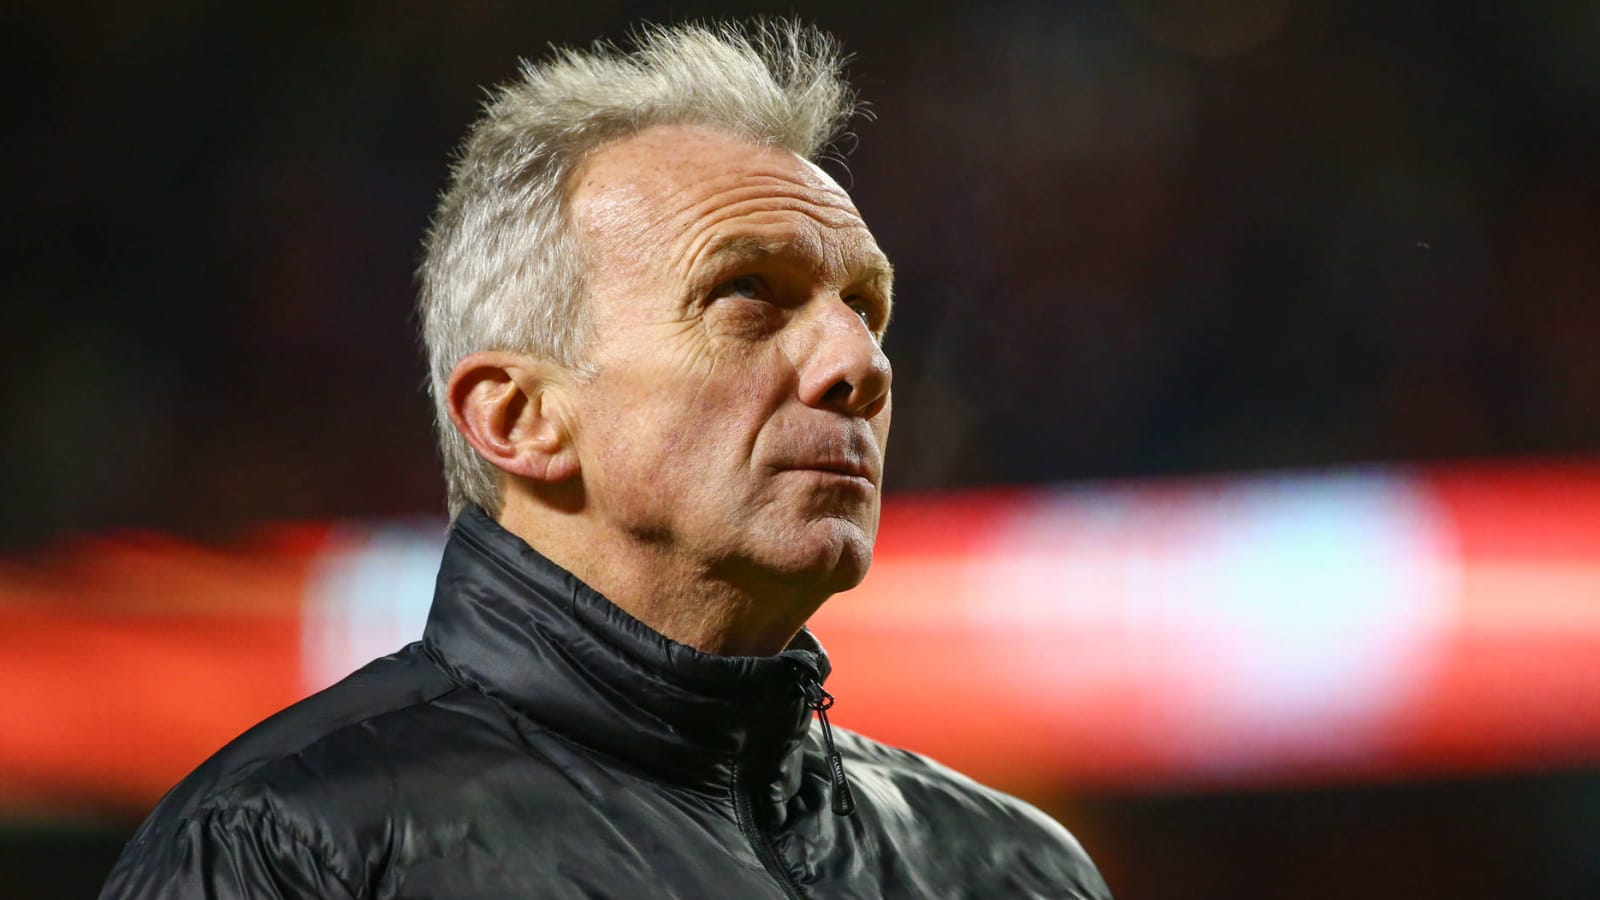 Joe Montana, wife thwarted alleged kidnapping of their grandchild